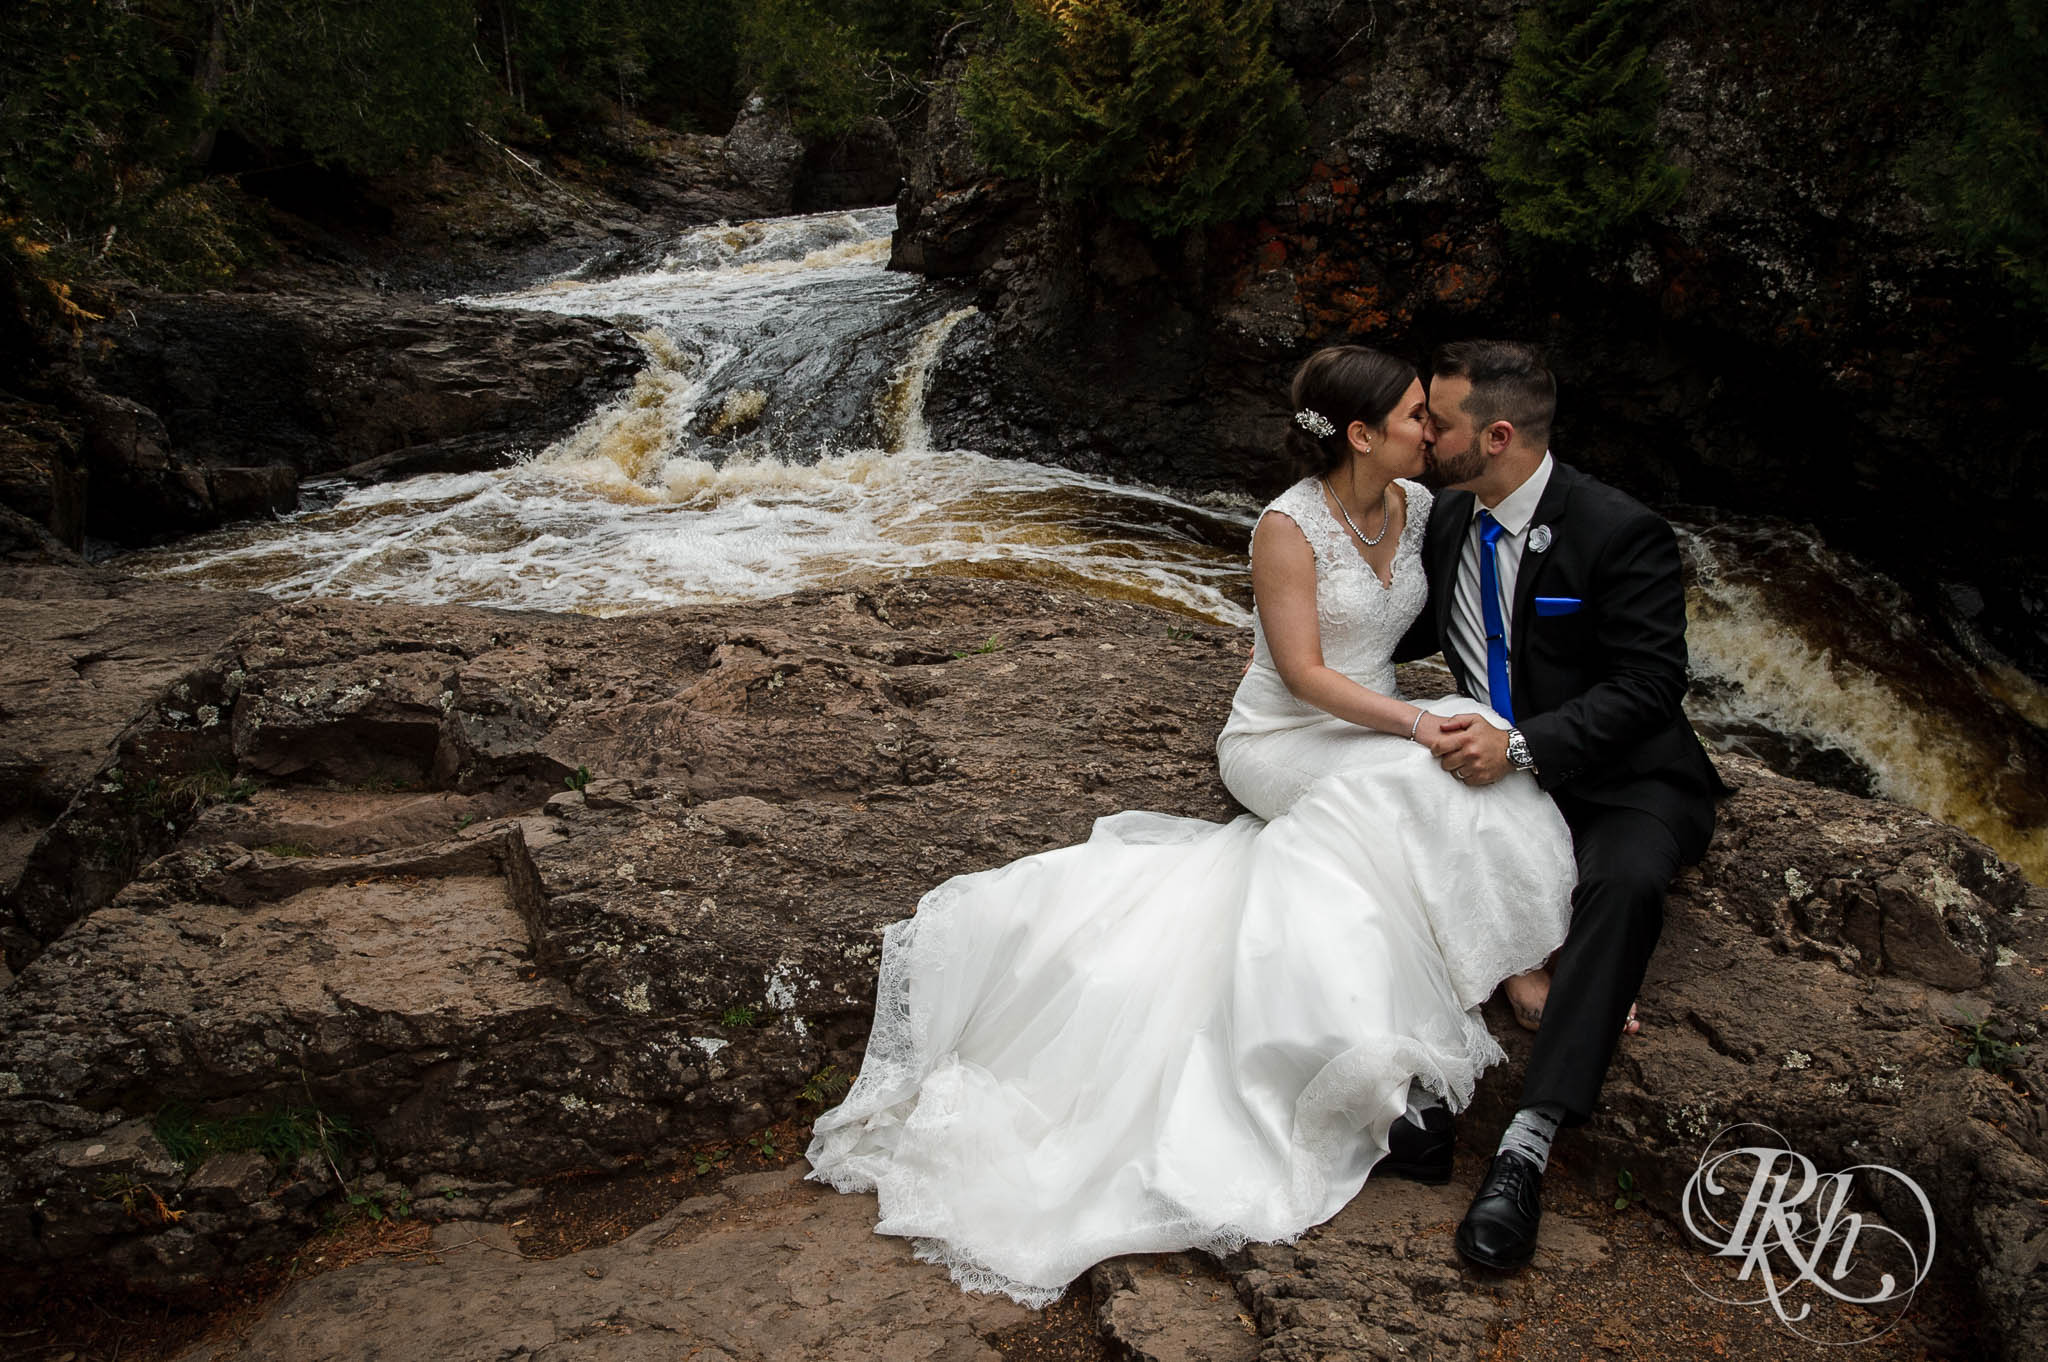 Bride and groom kiss on cliff at the bottom of a waterfall in North Shore in Minnesota.